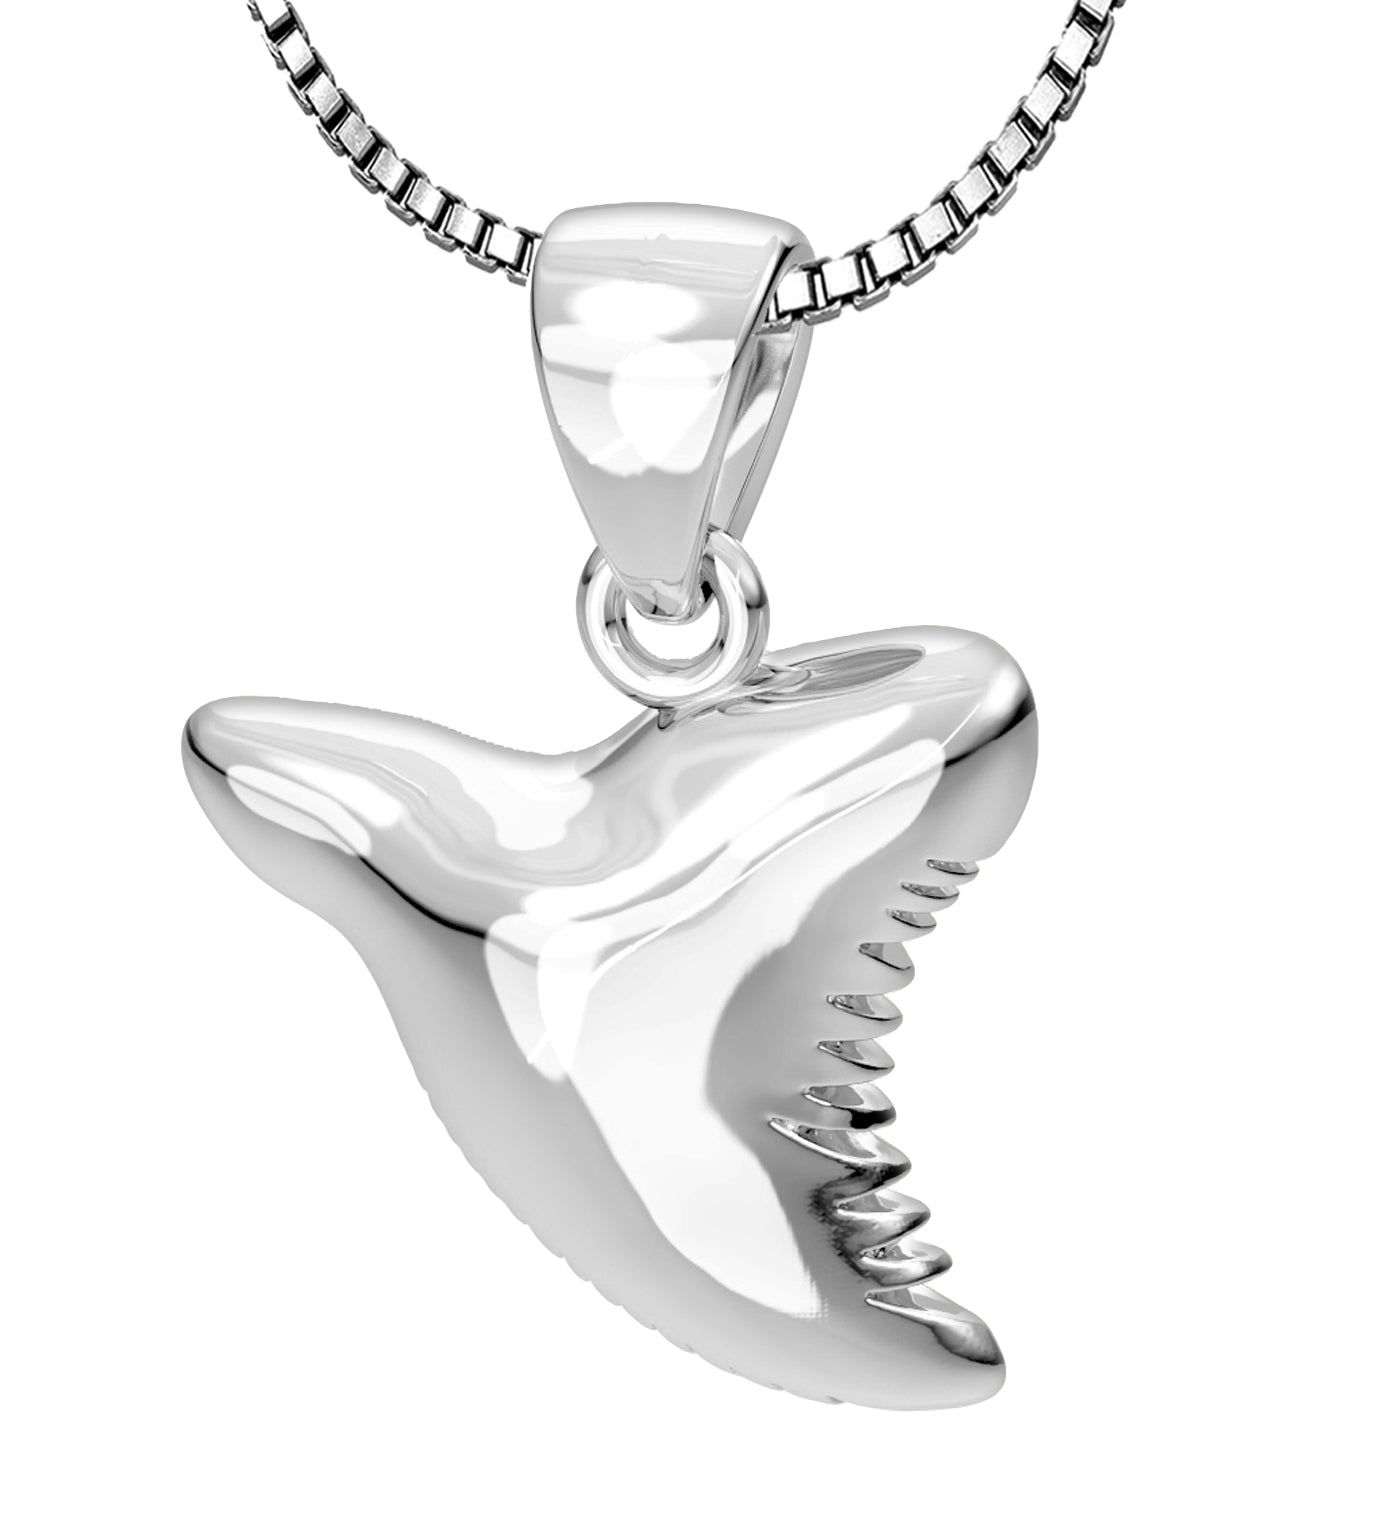 Solid 925 Sterling Silver Shark Tooth Aquatic Pendant Necklace, 18mm - US Jewels